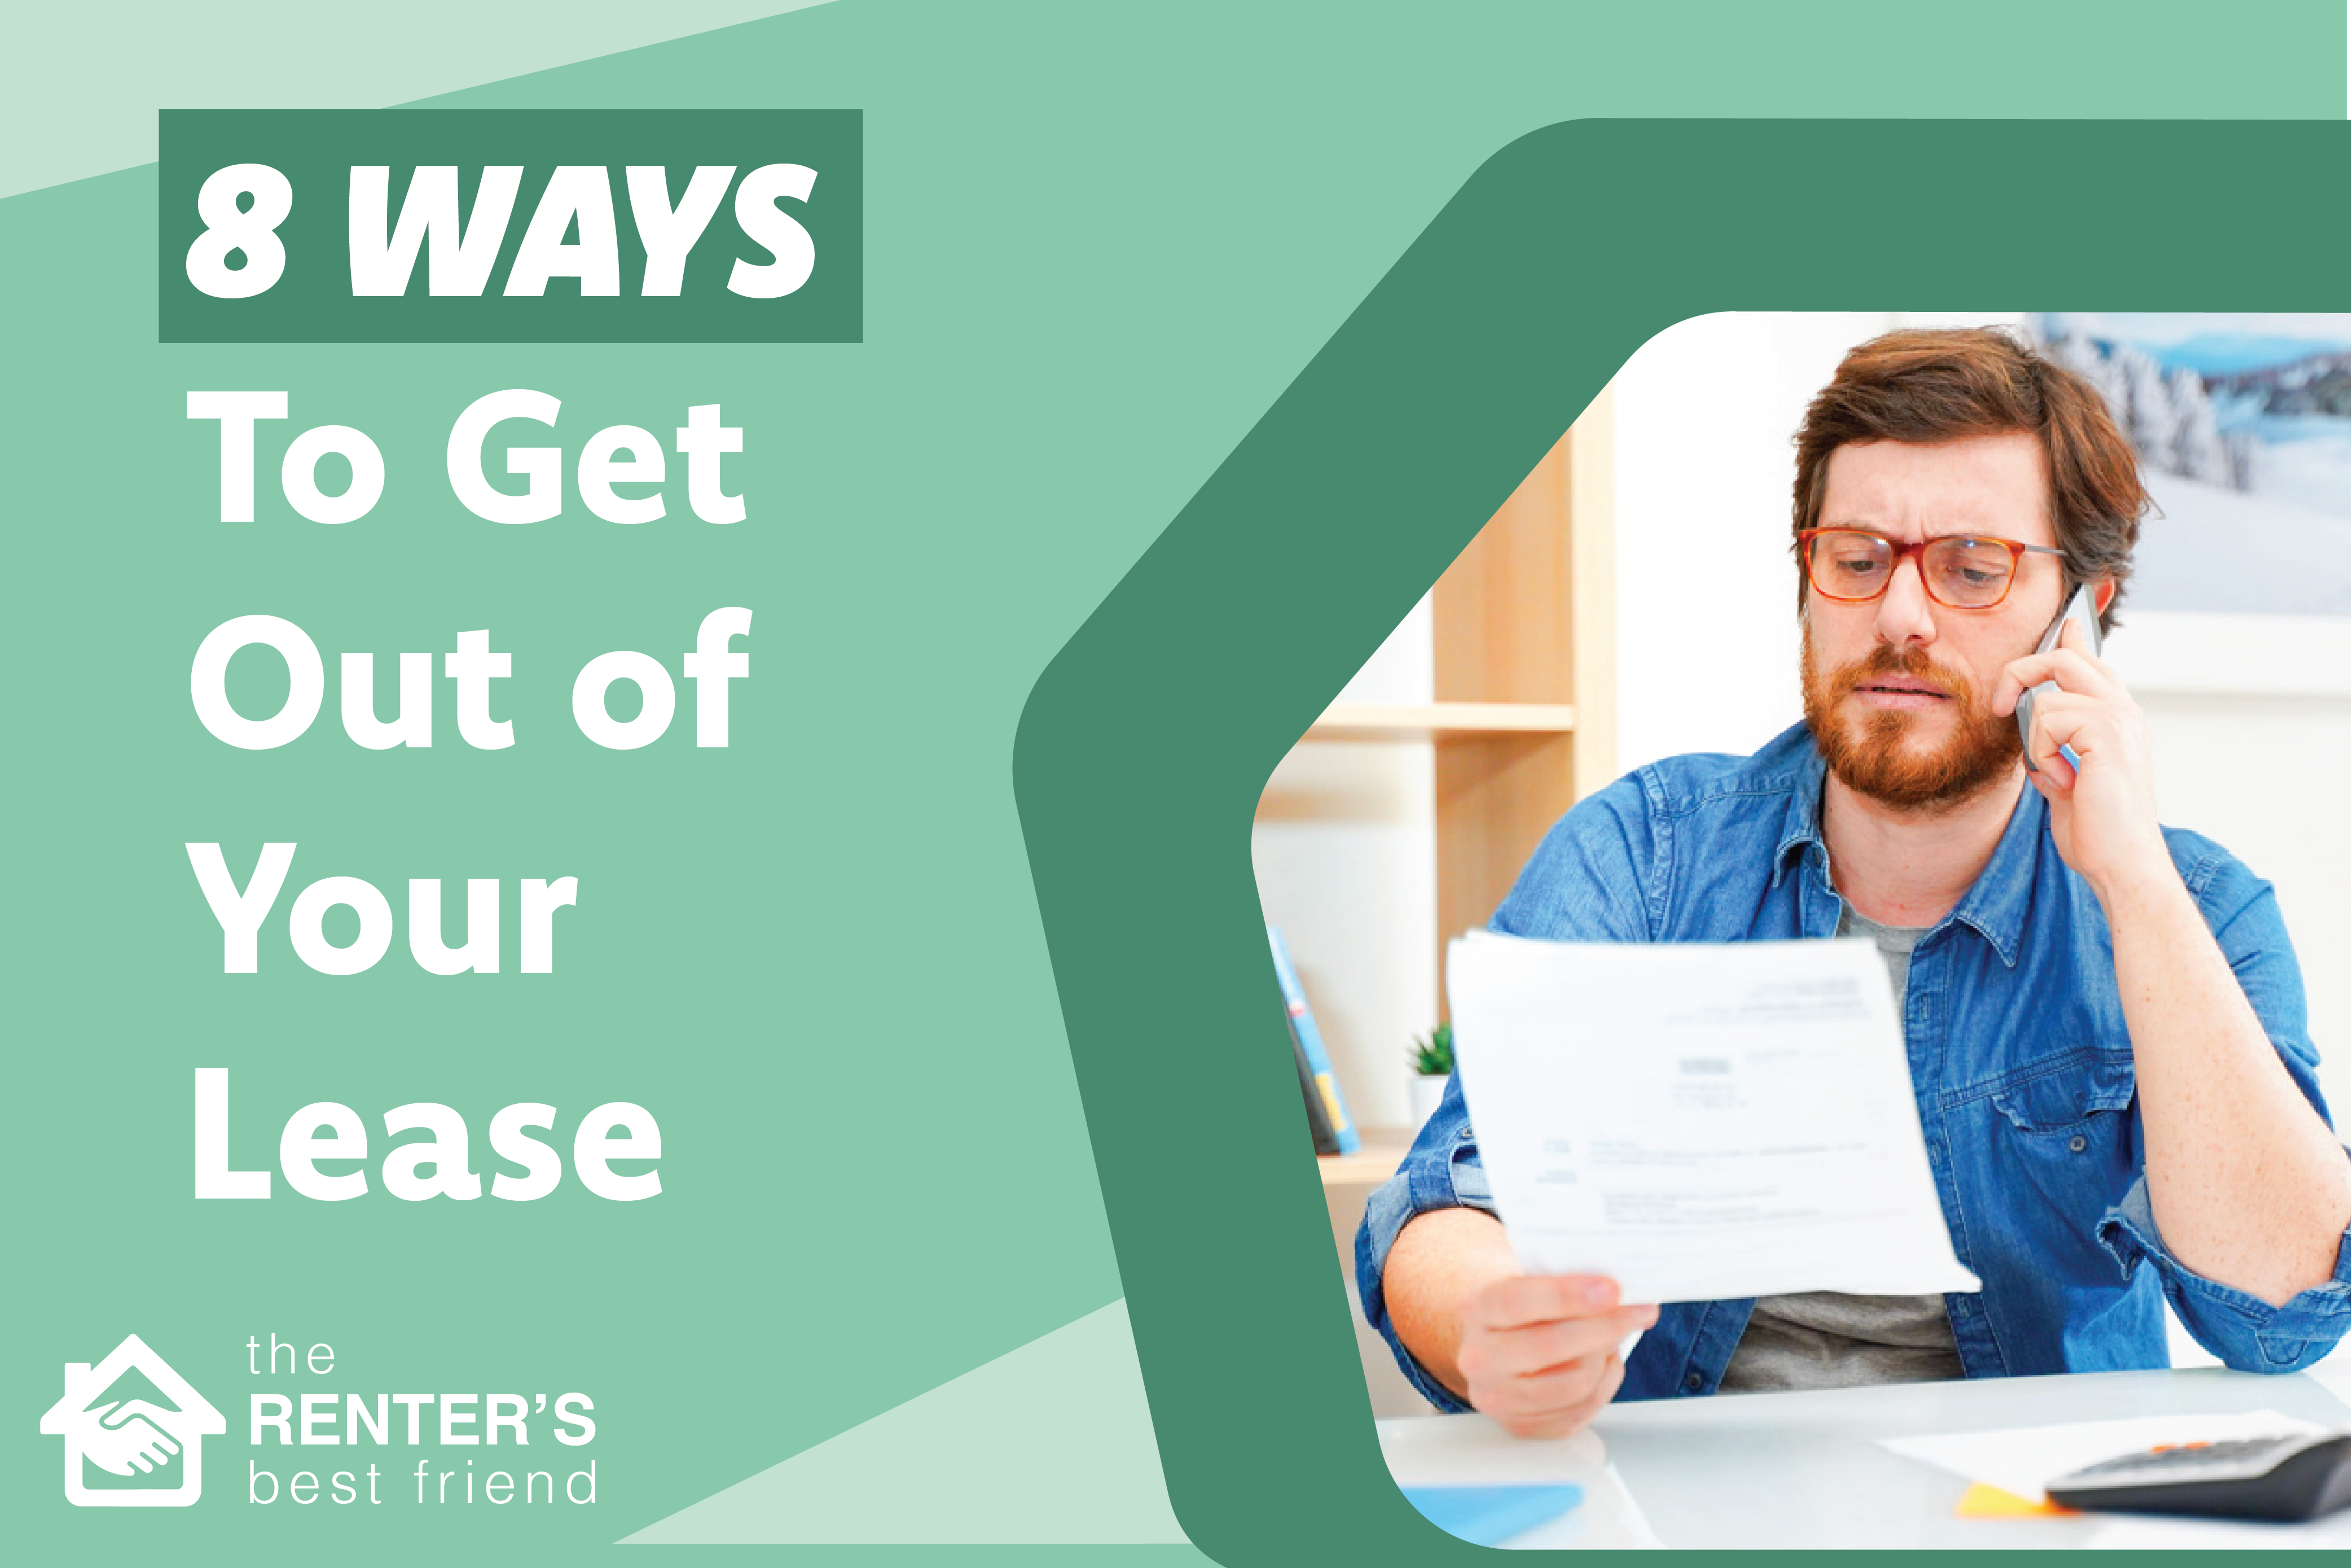 8 ways to get out of your lease